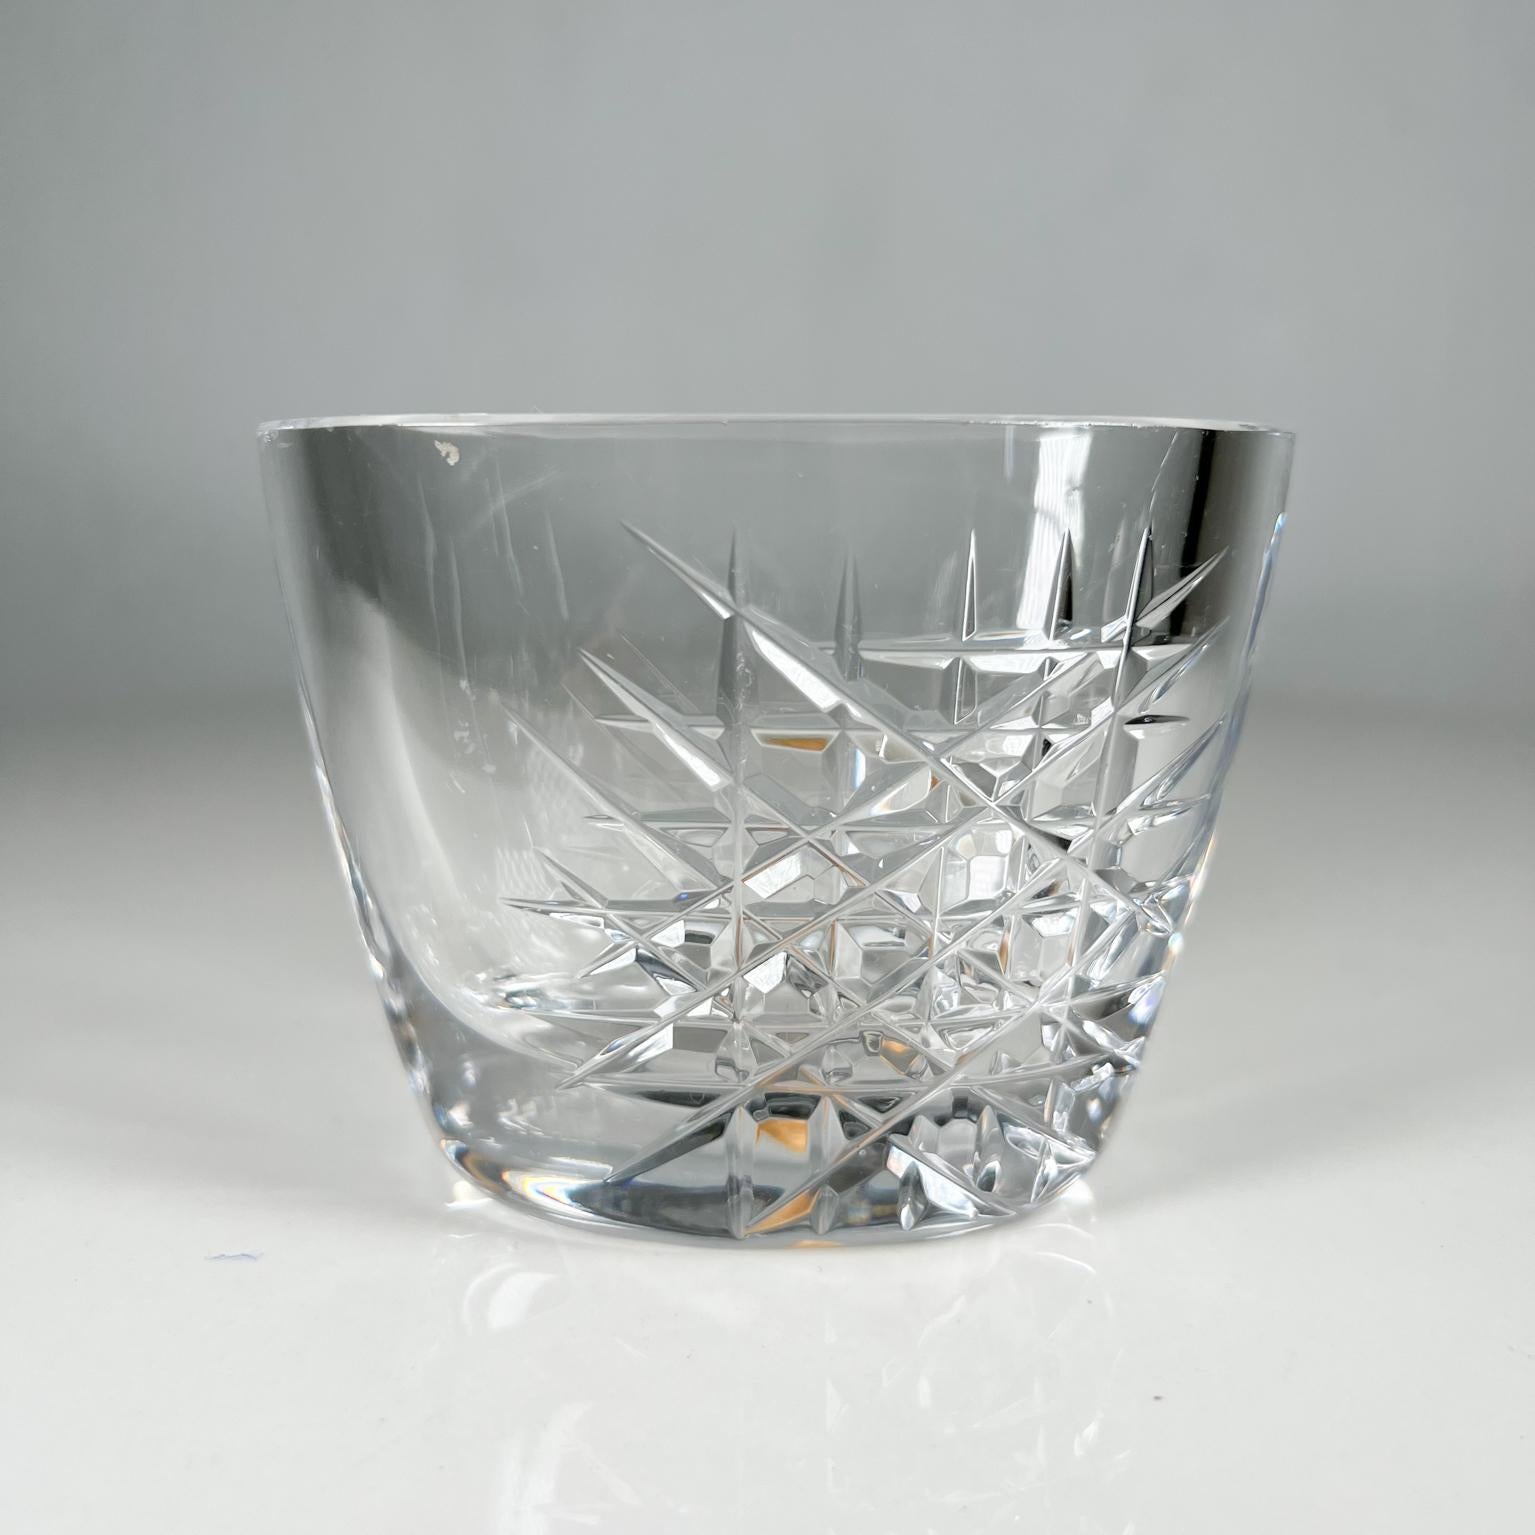 Vintage Orrefors crystal glass vase bowl Sweden 
Signed 
Measures: 4 W x 2.5 D x 3 H 
Preowned vintage condition.
See images provided.